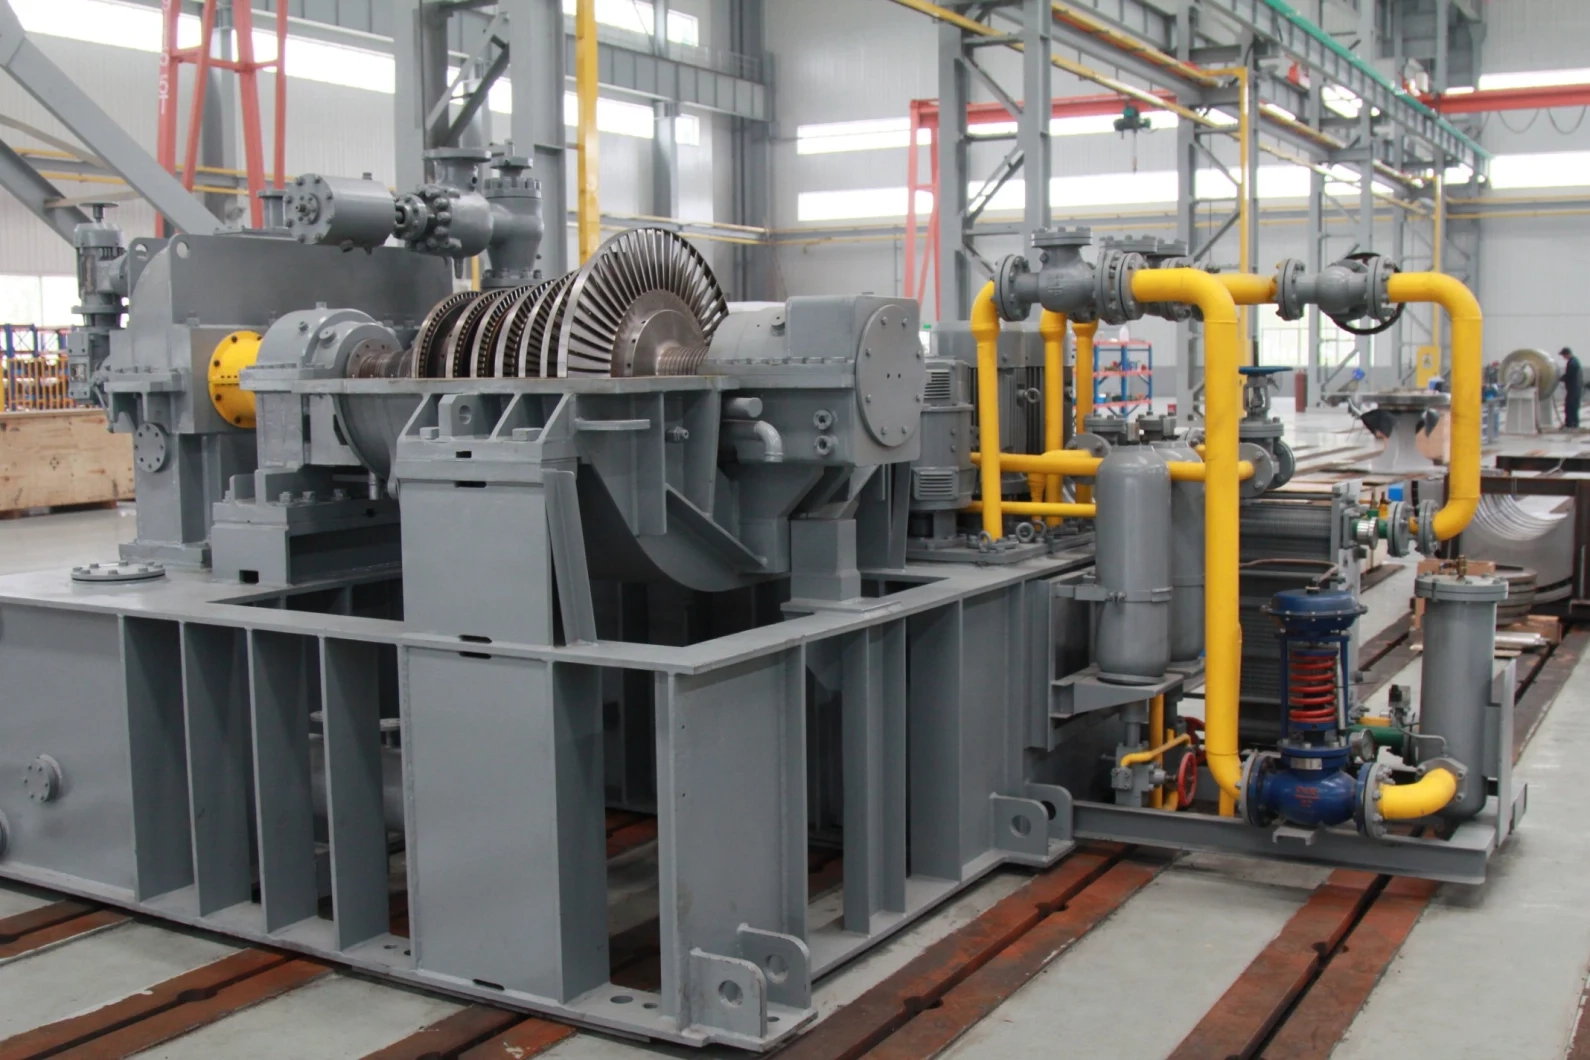 1751-gas-generation-steam-turbine-generator-with-excellent-supervision-1674420608928.png